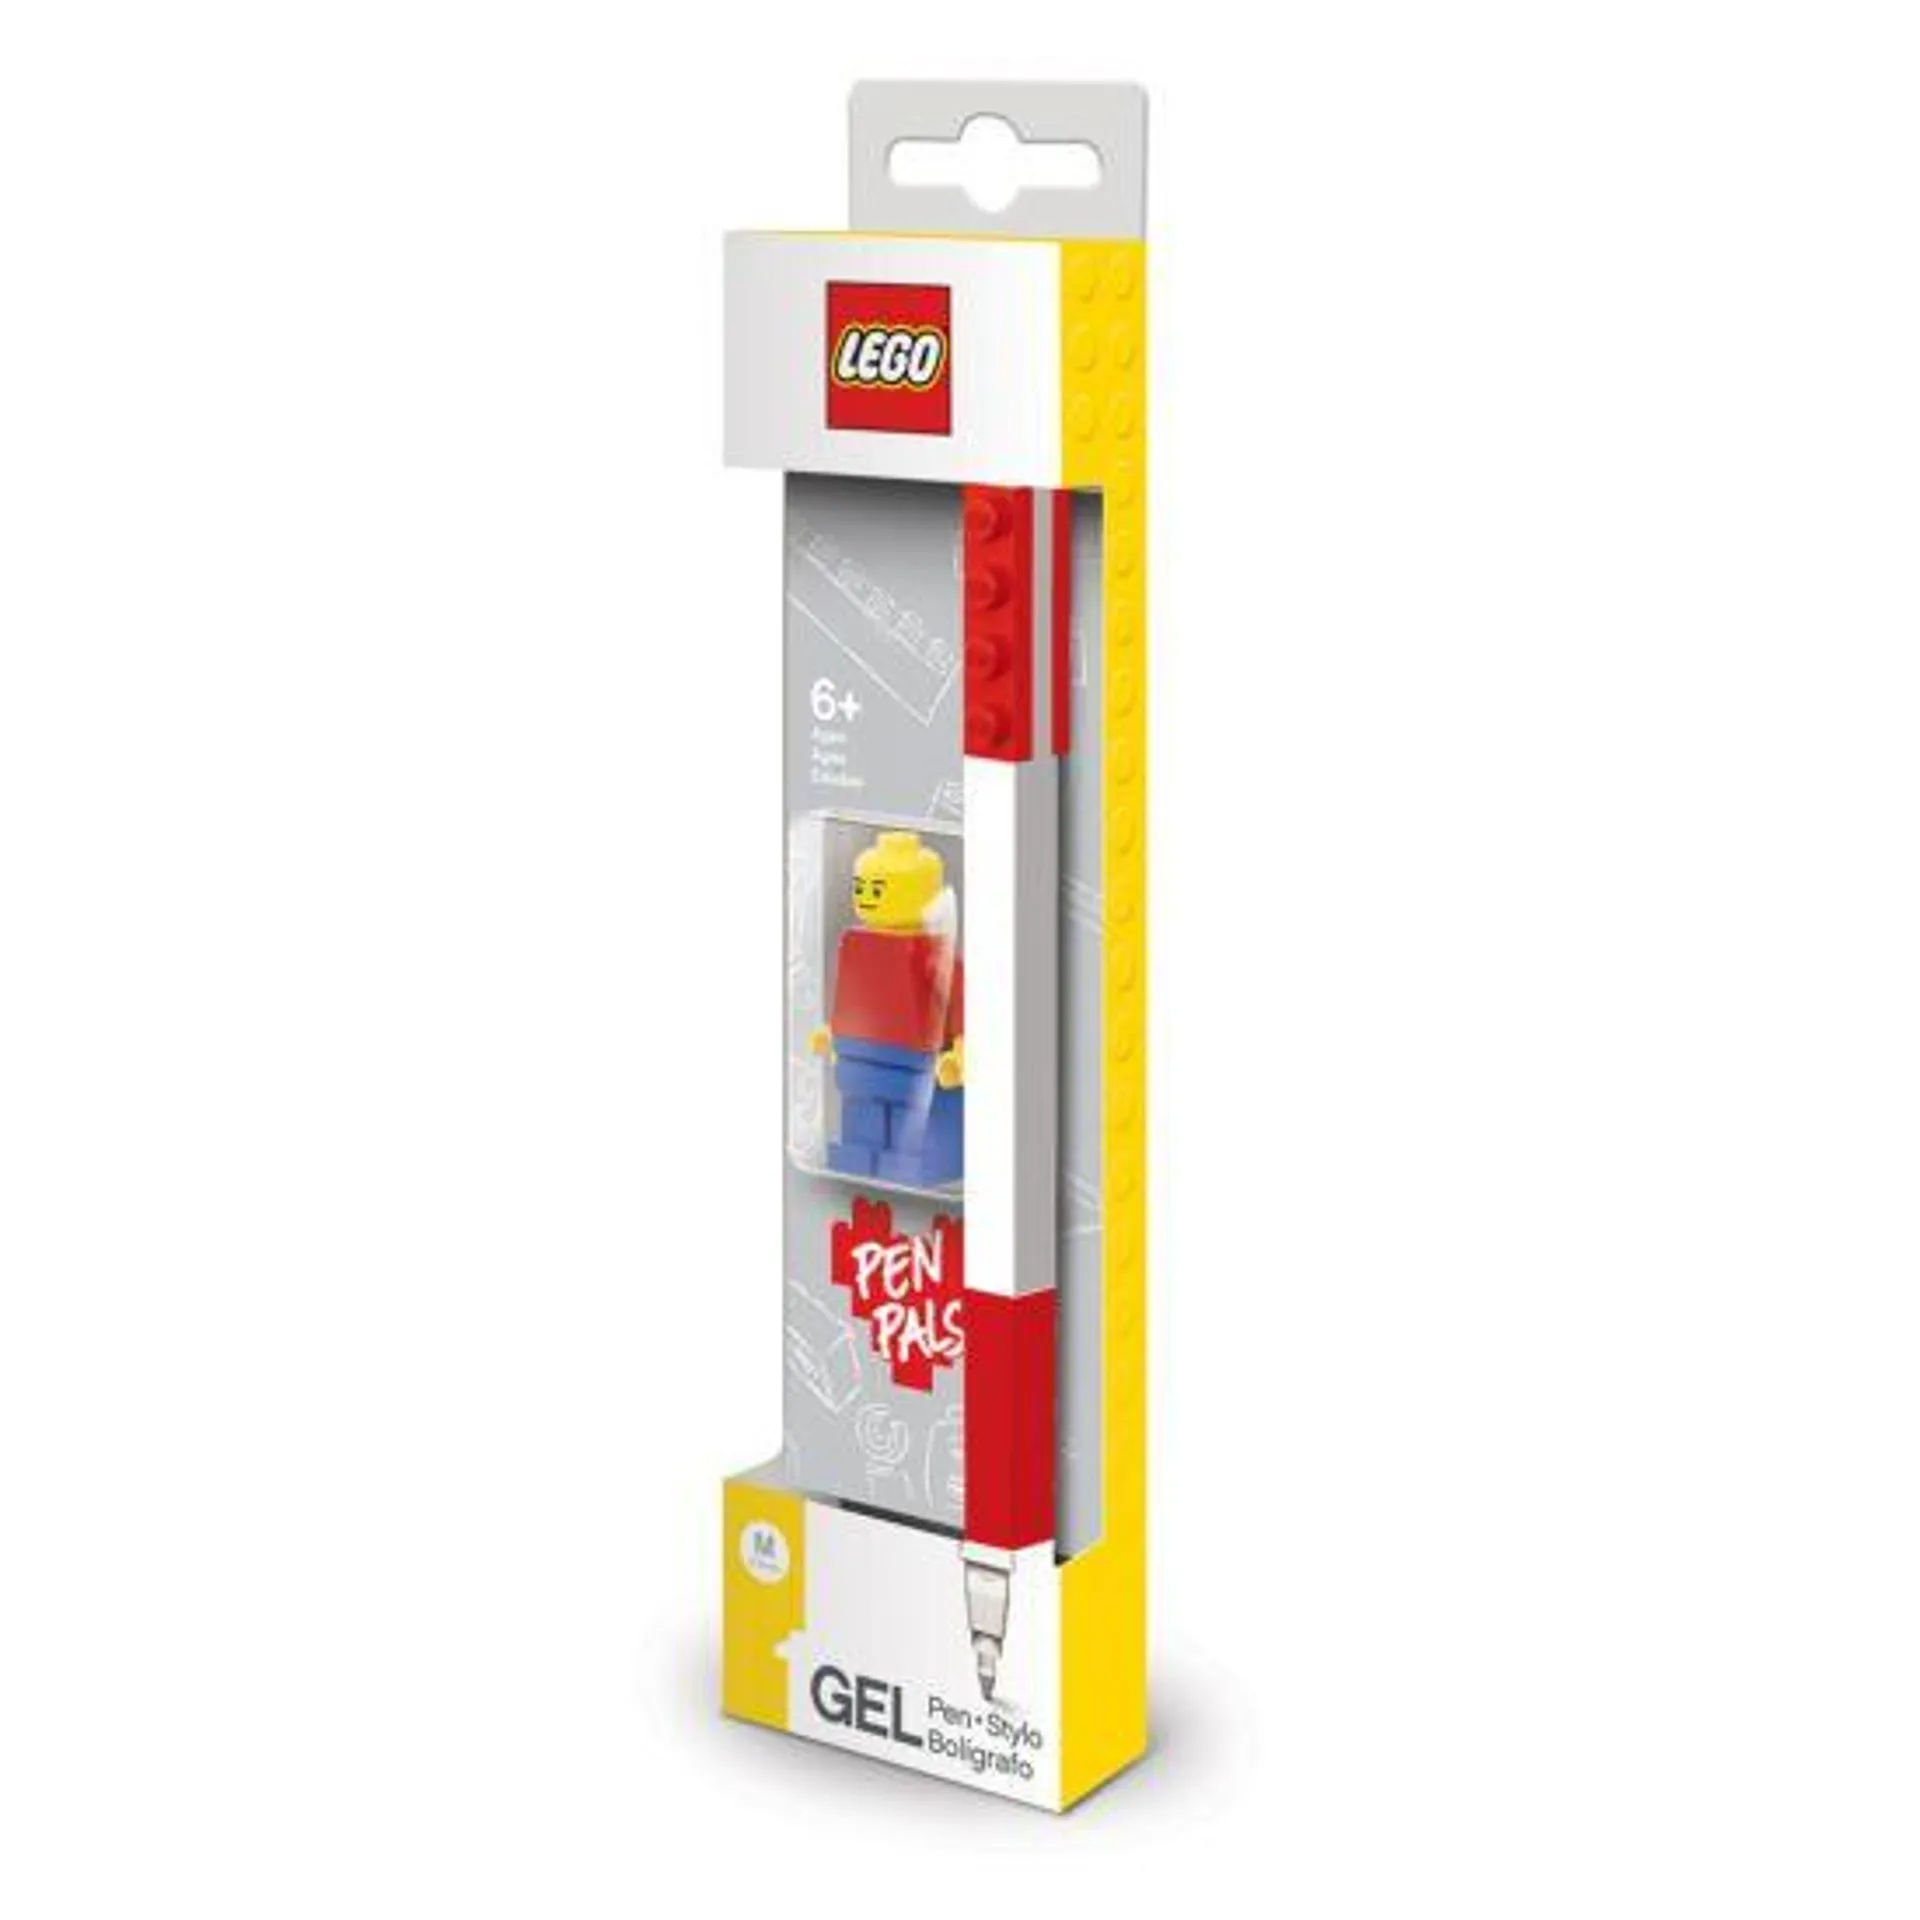 LEGO Iconic Writing Instrument - Pen Pal, Gel Pen with Minifigure Red